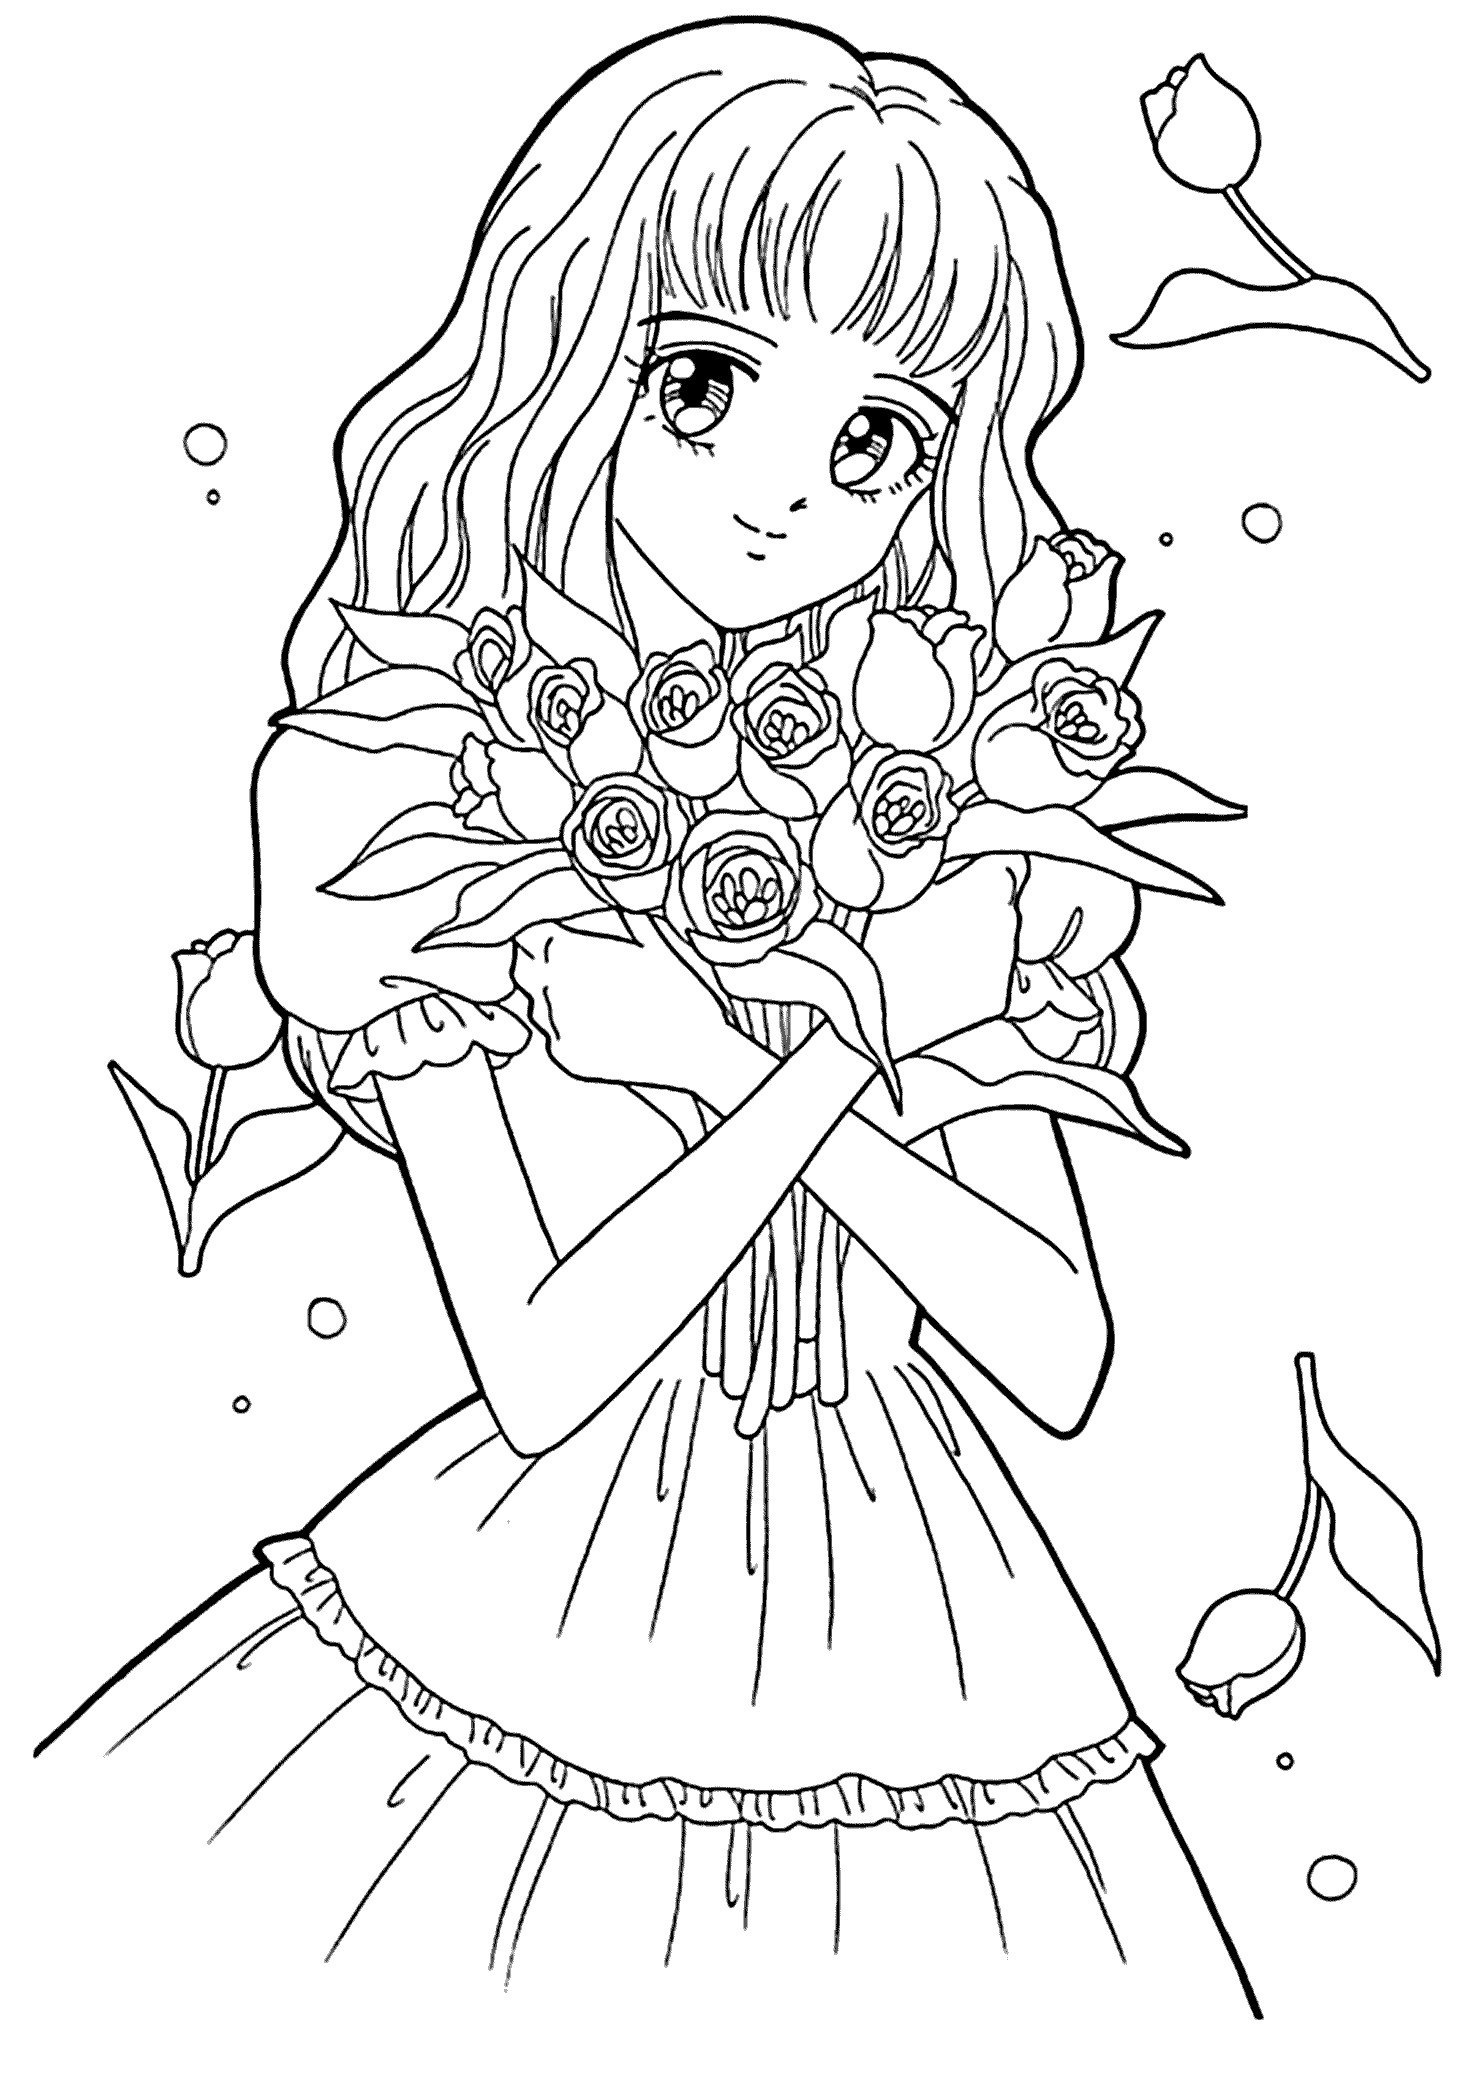 Coloring Pages For Girls Cute
 Best Free Printable Coloring Pages for Kids and Teens